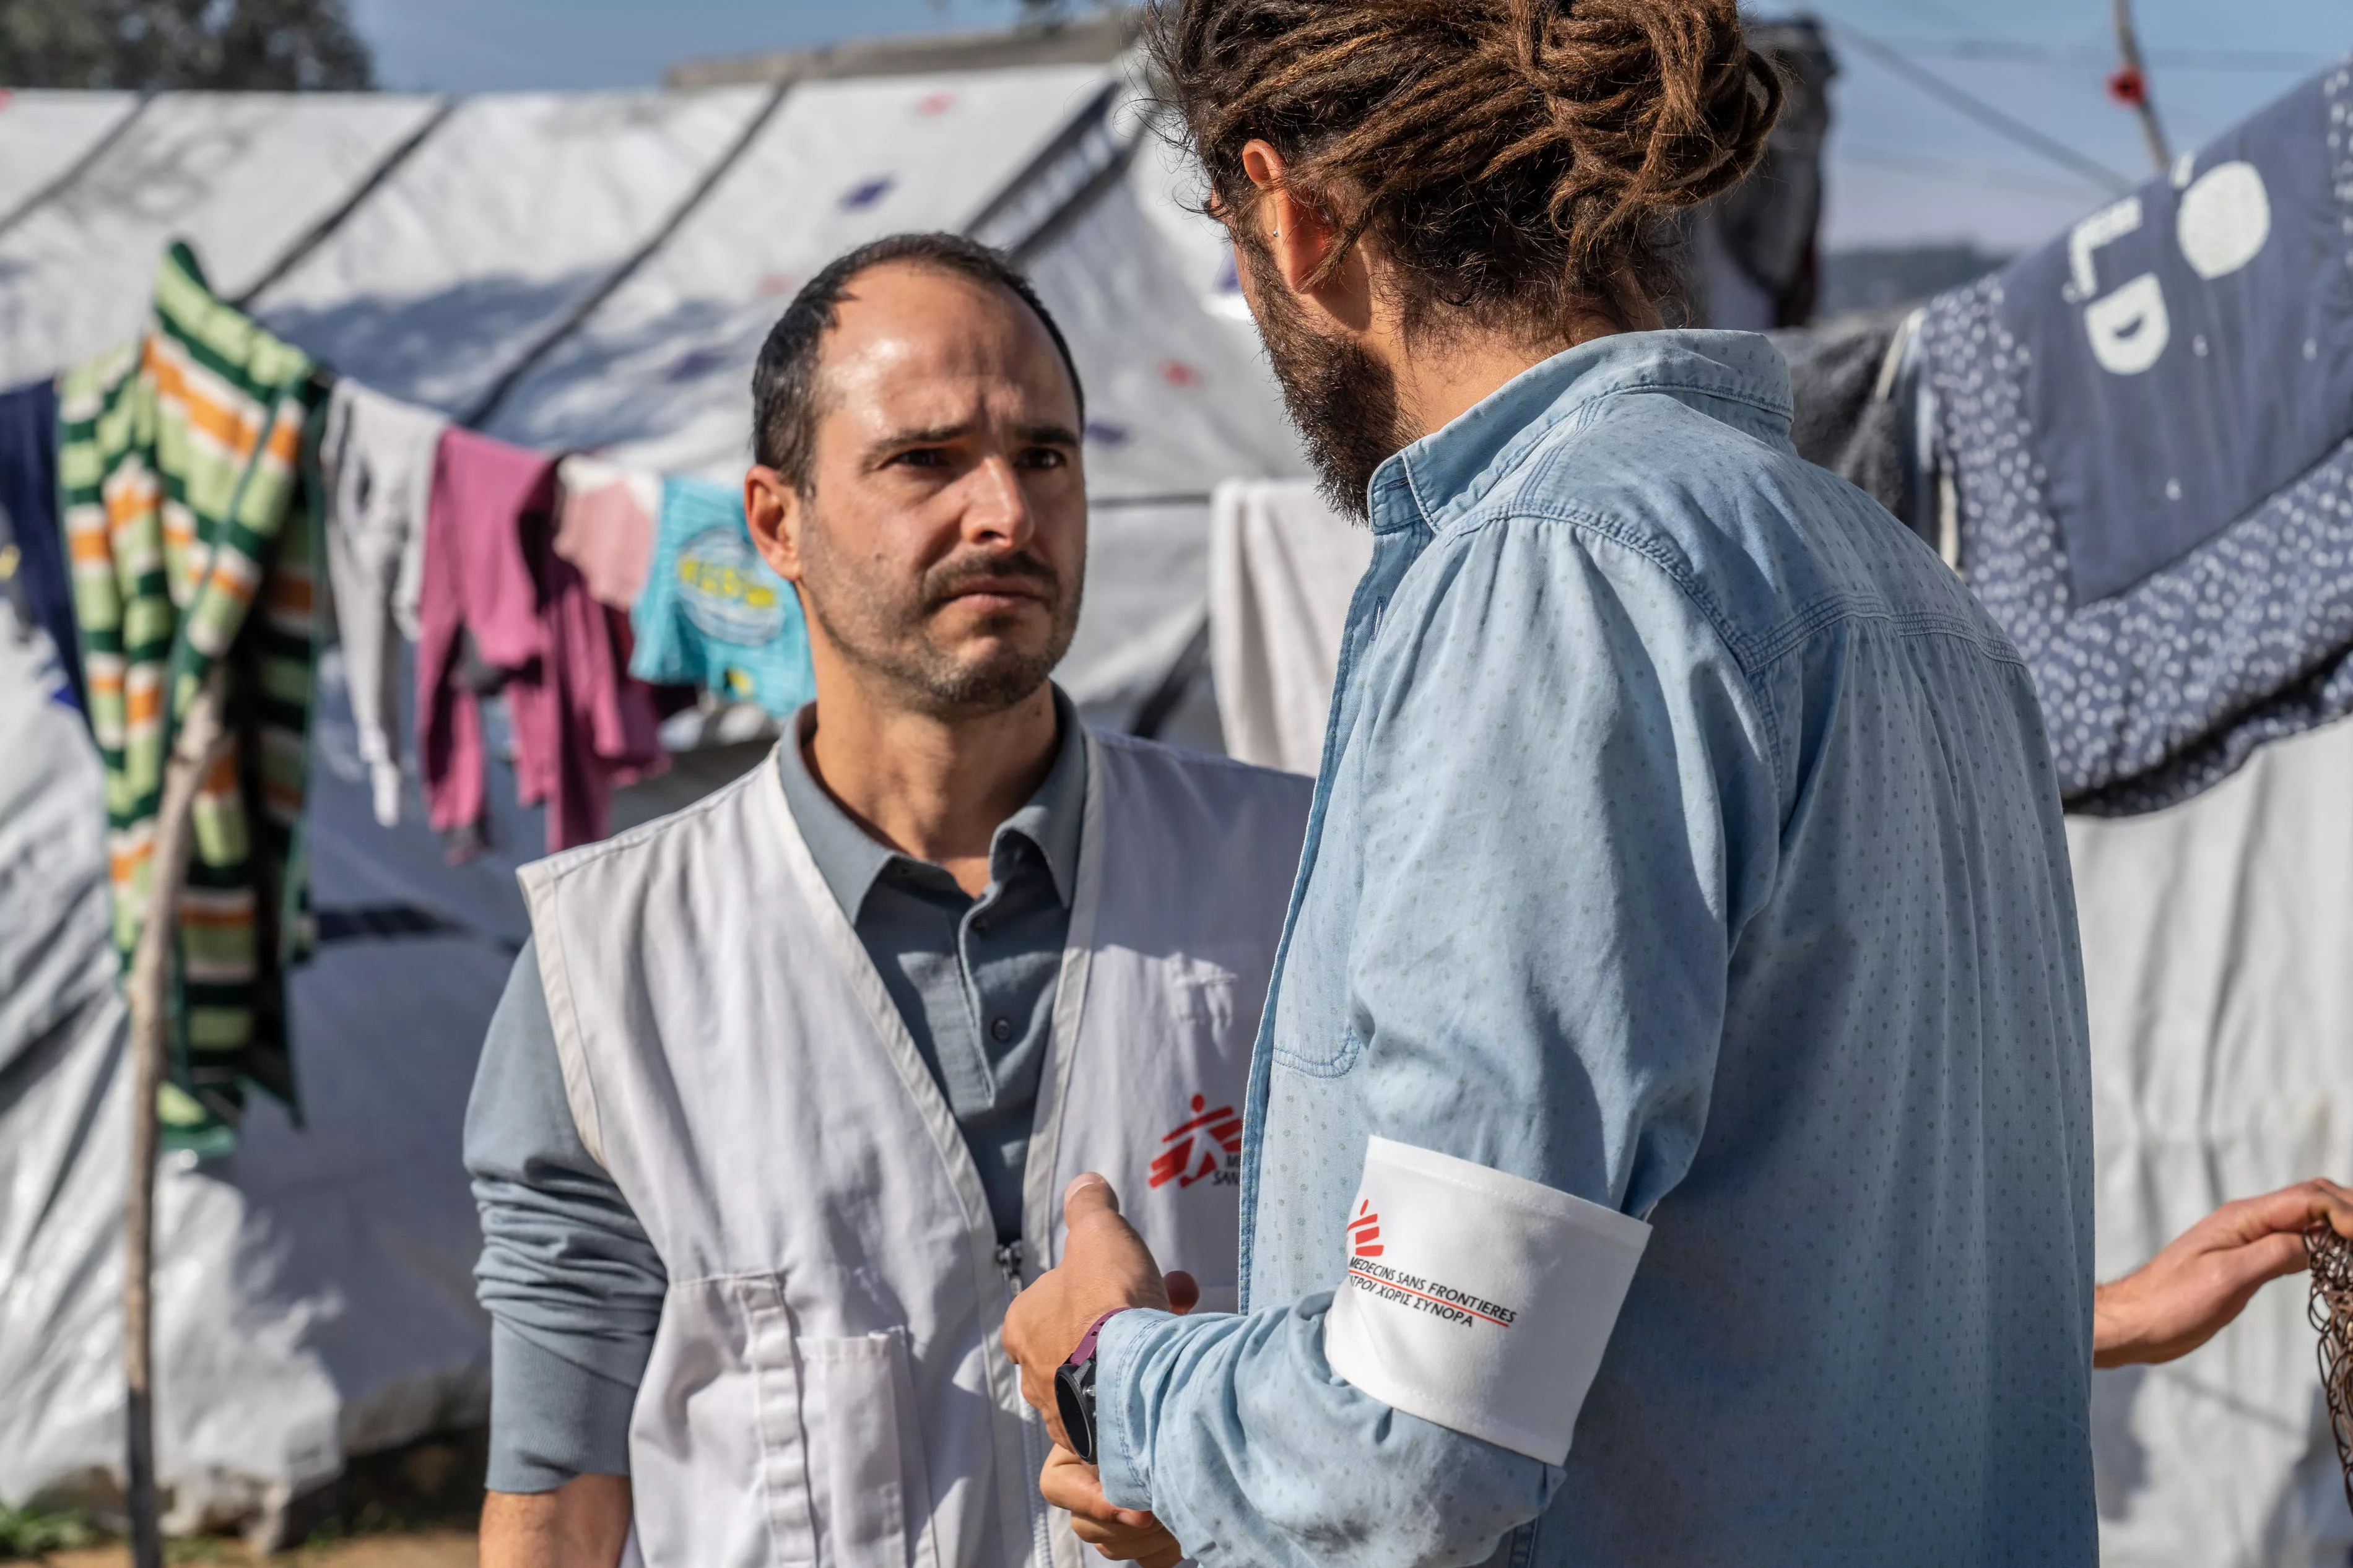 The MSF International President Christos Christou visitng Moria camp in Lesbos to see the situation of asylum seekers and refugees trapped on the greek islands.